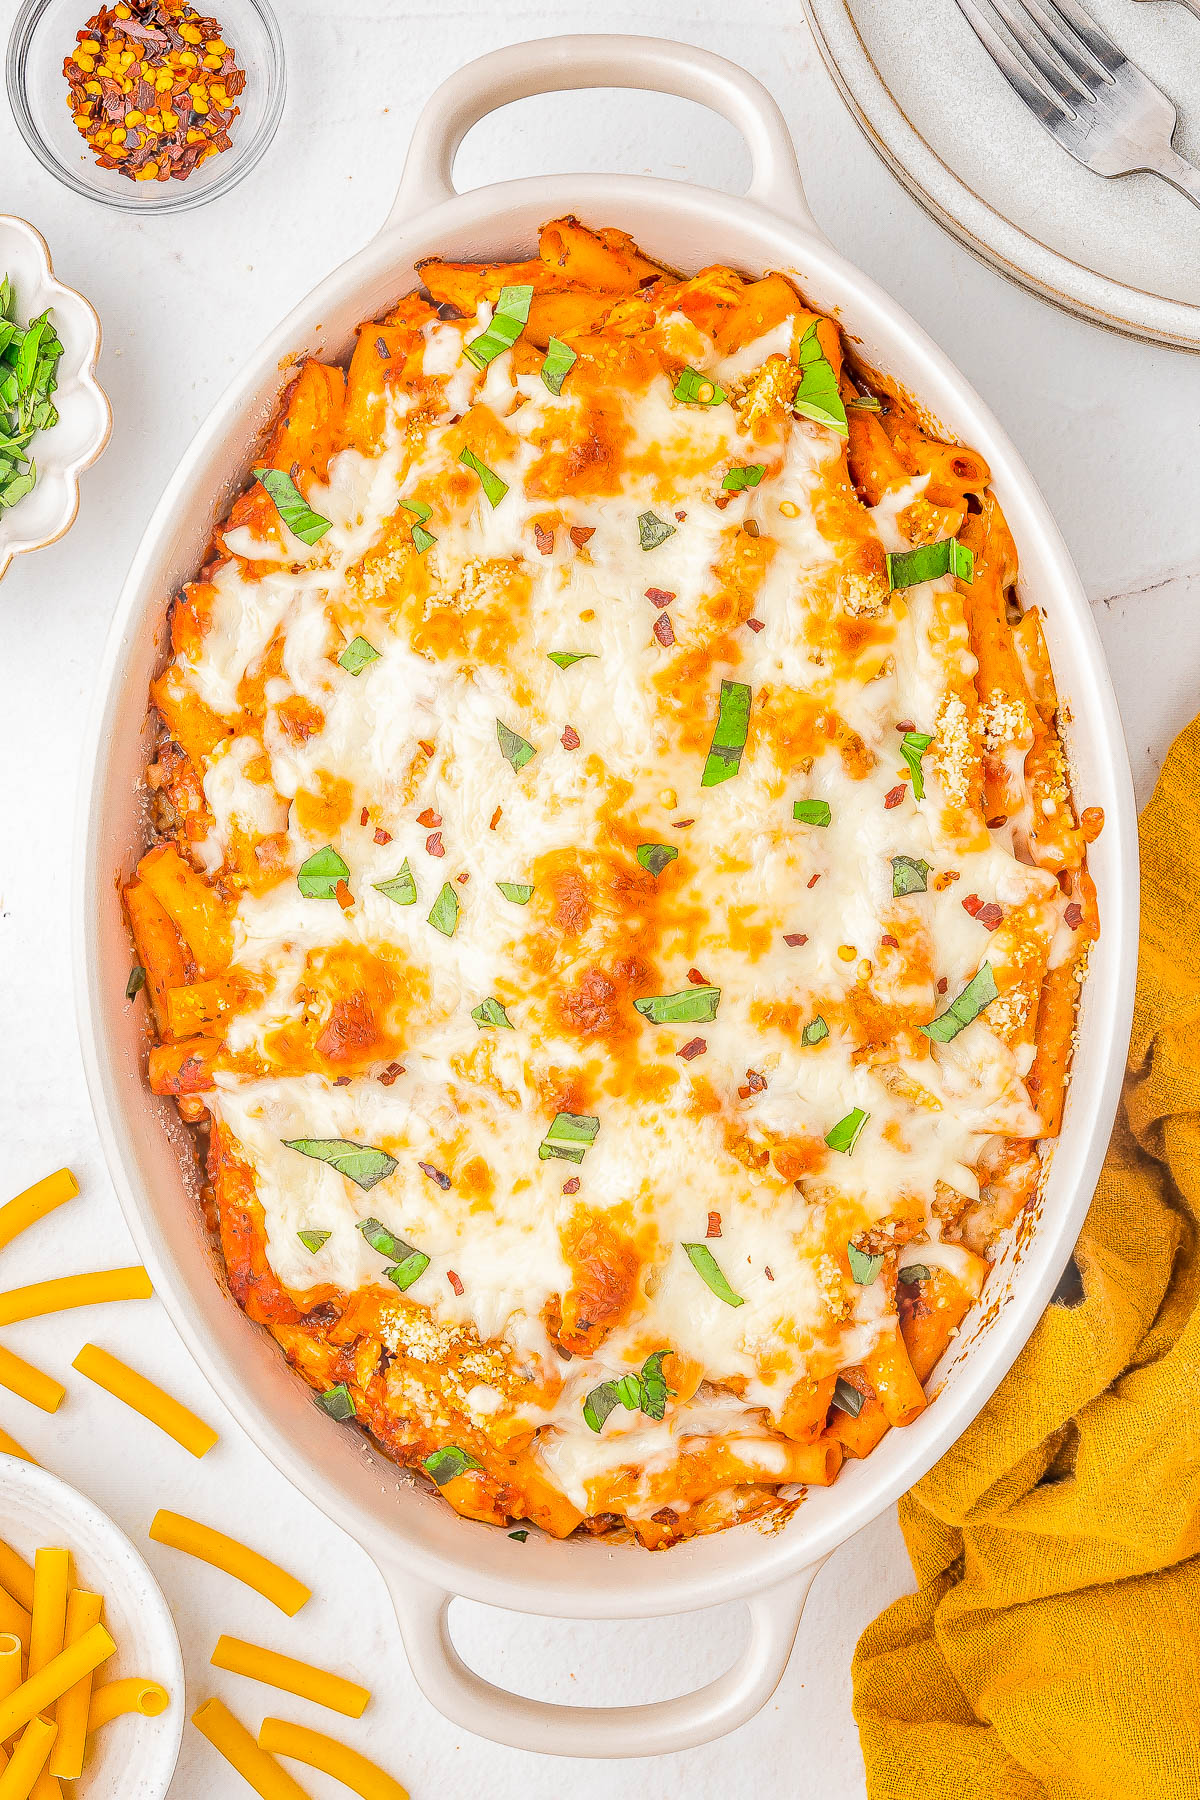 Baked Ziti with Chicken — A FAST and EASY pasta bake made with al dente ziti, juicy chicken, marinara sauce, and two types of CHEESE for the ultimate comfort food casserole! Ready in 45 minutes, perfect for weeknight dinners or casual family get-togethers, and picky eater approved! Use pasta that's in your pantry, a jar of marinara, rotisserie chicken, cheese, and you're set - nothing too fancy or complicated here and planned leftovers are a bonus! 